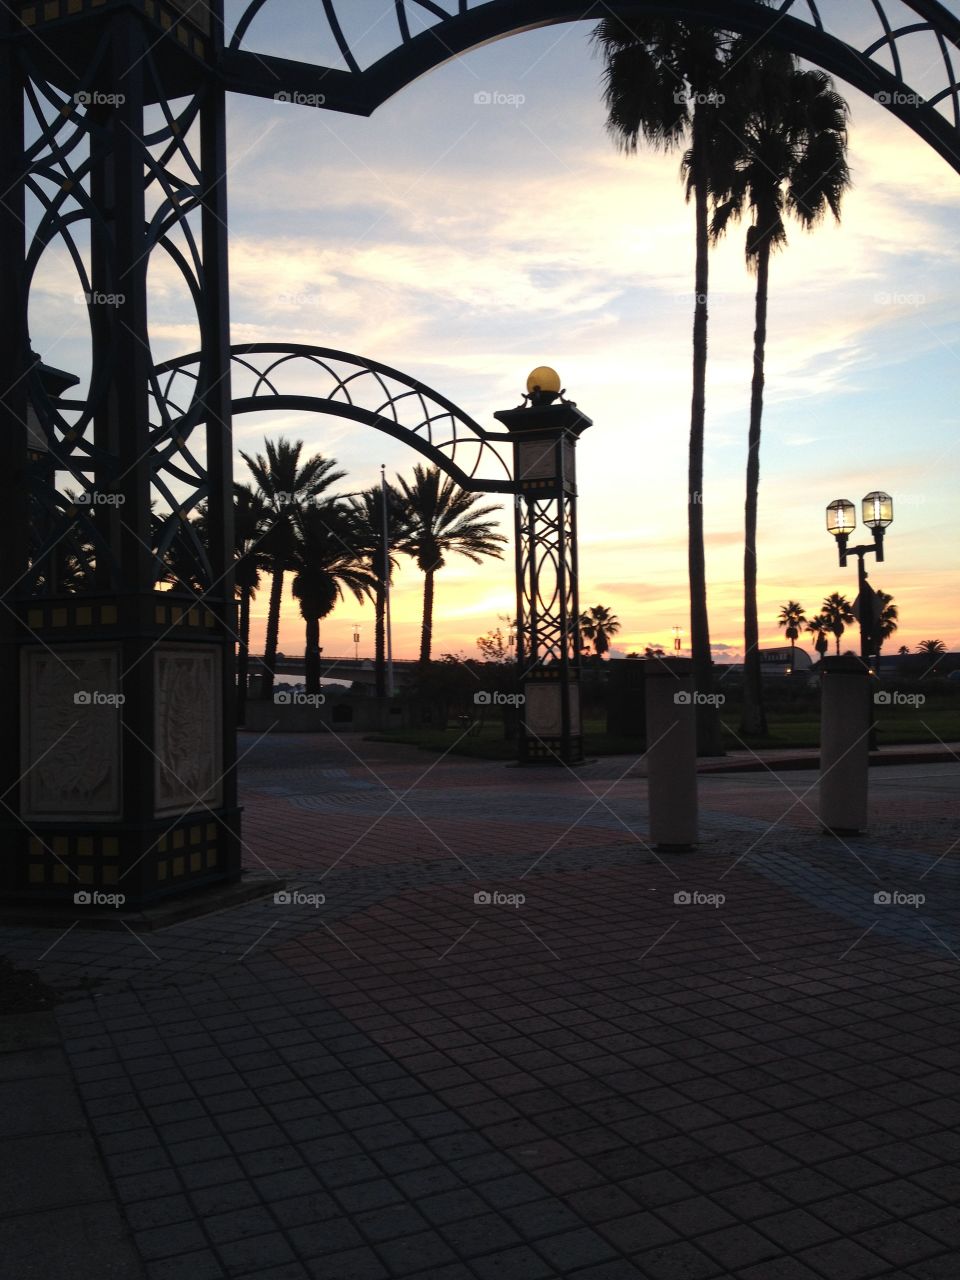 Sunrise, Daytona Beach Florida with palm trees and arch over Beach Street in silhouette.